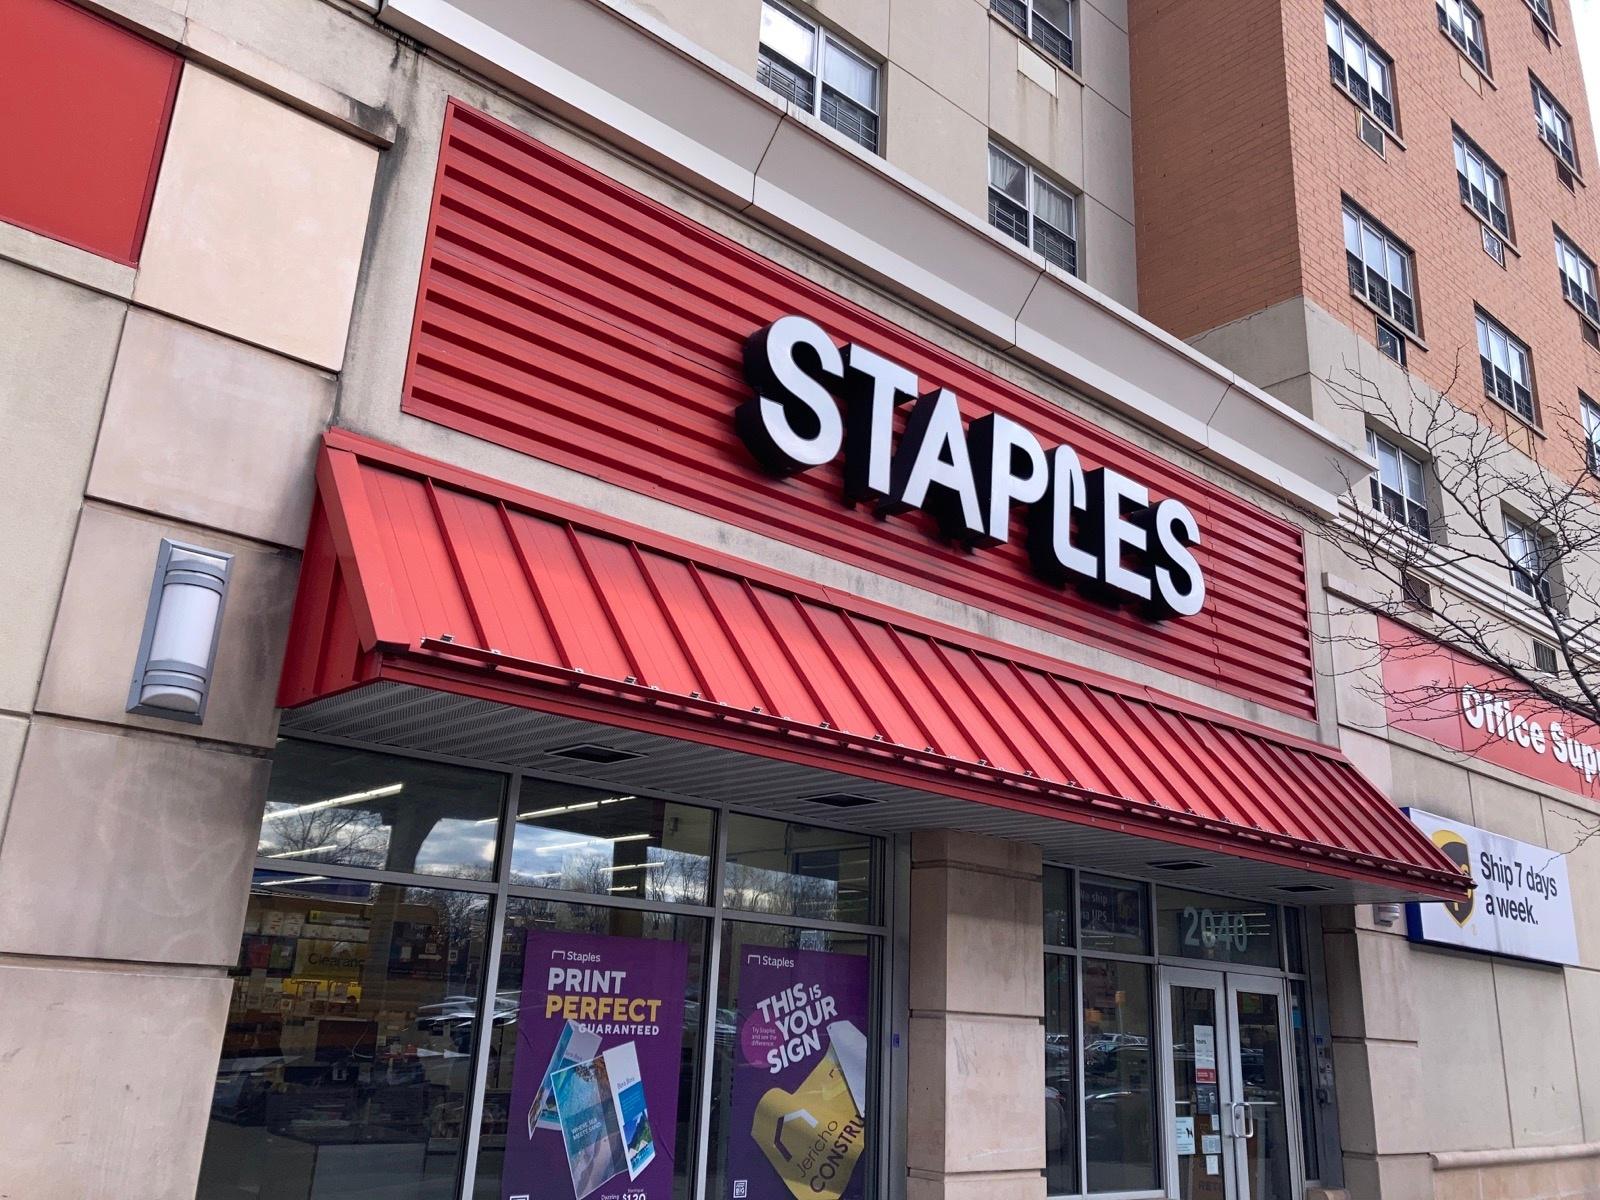 STAPLES locations in Houston - See hours, directions, tips, and